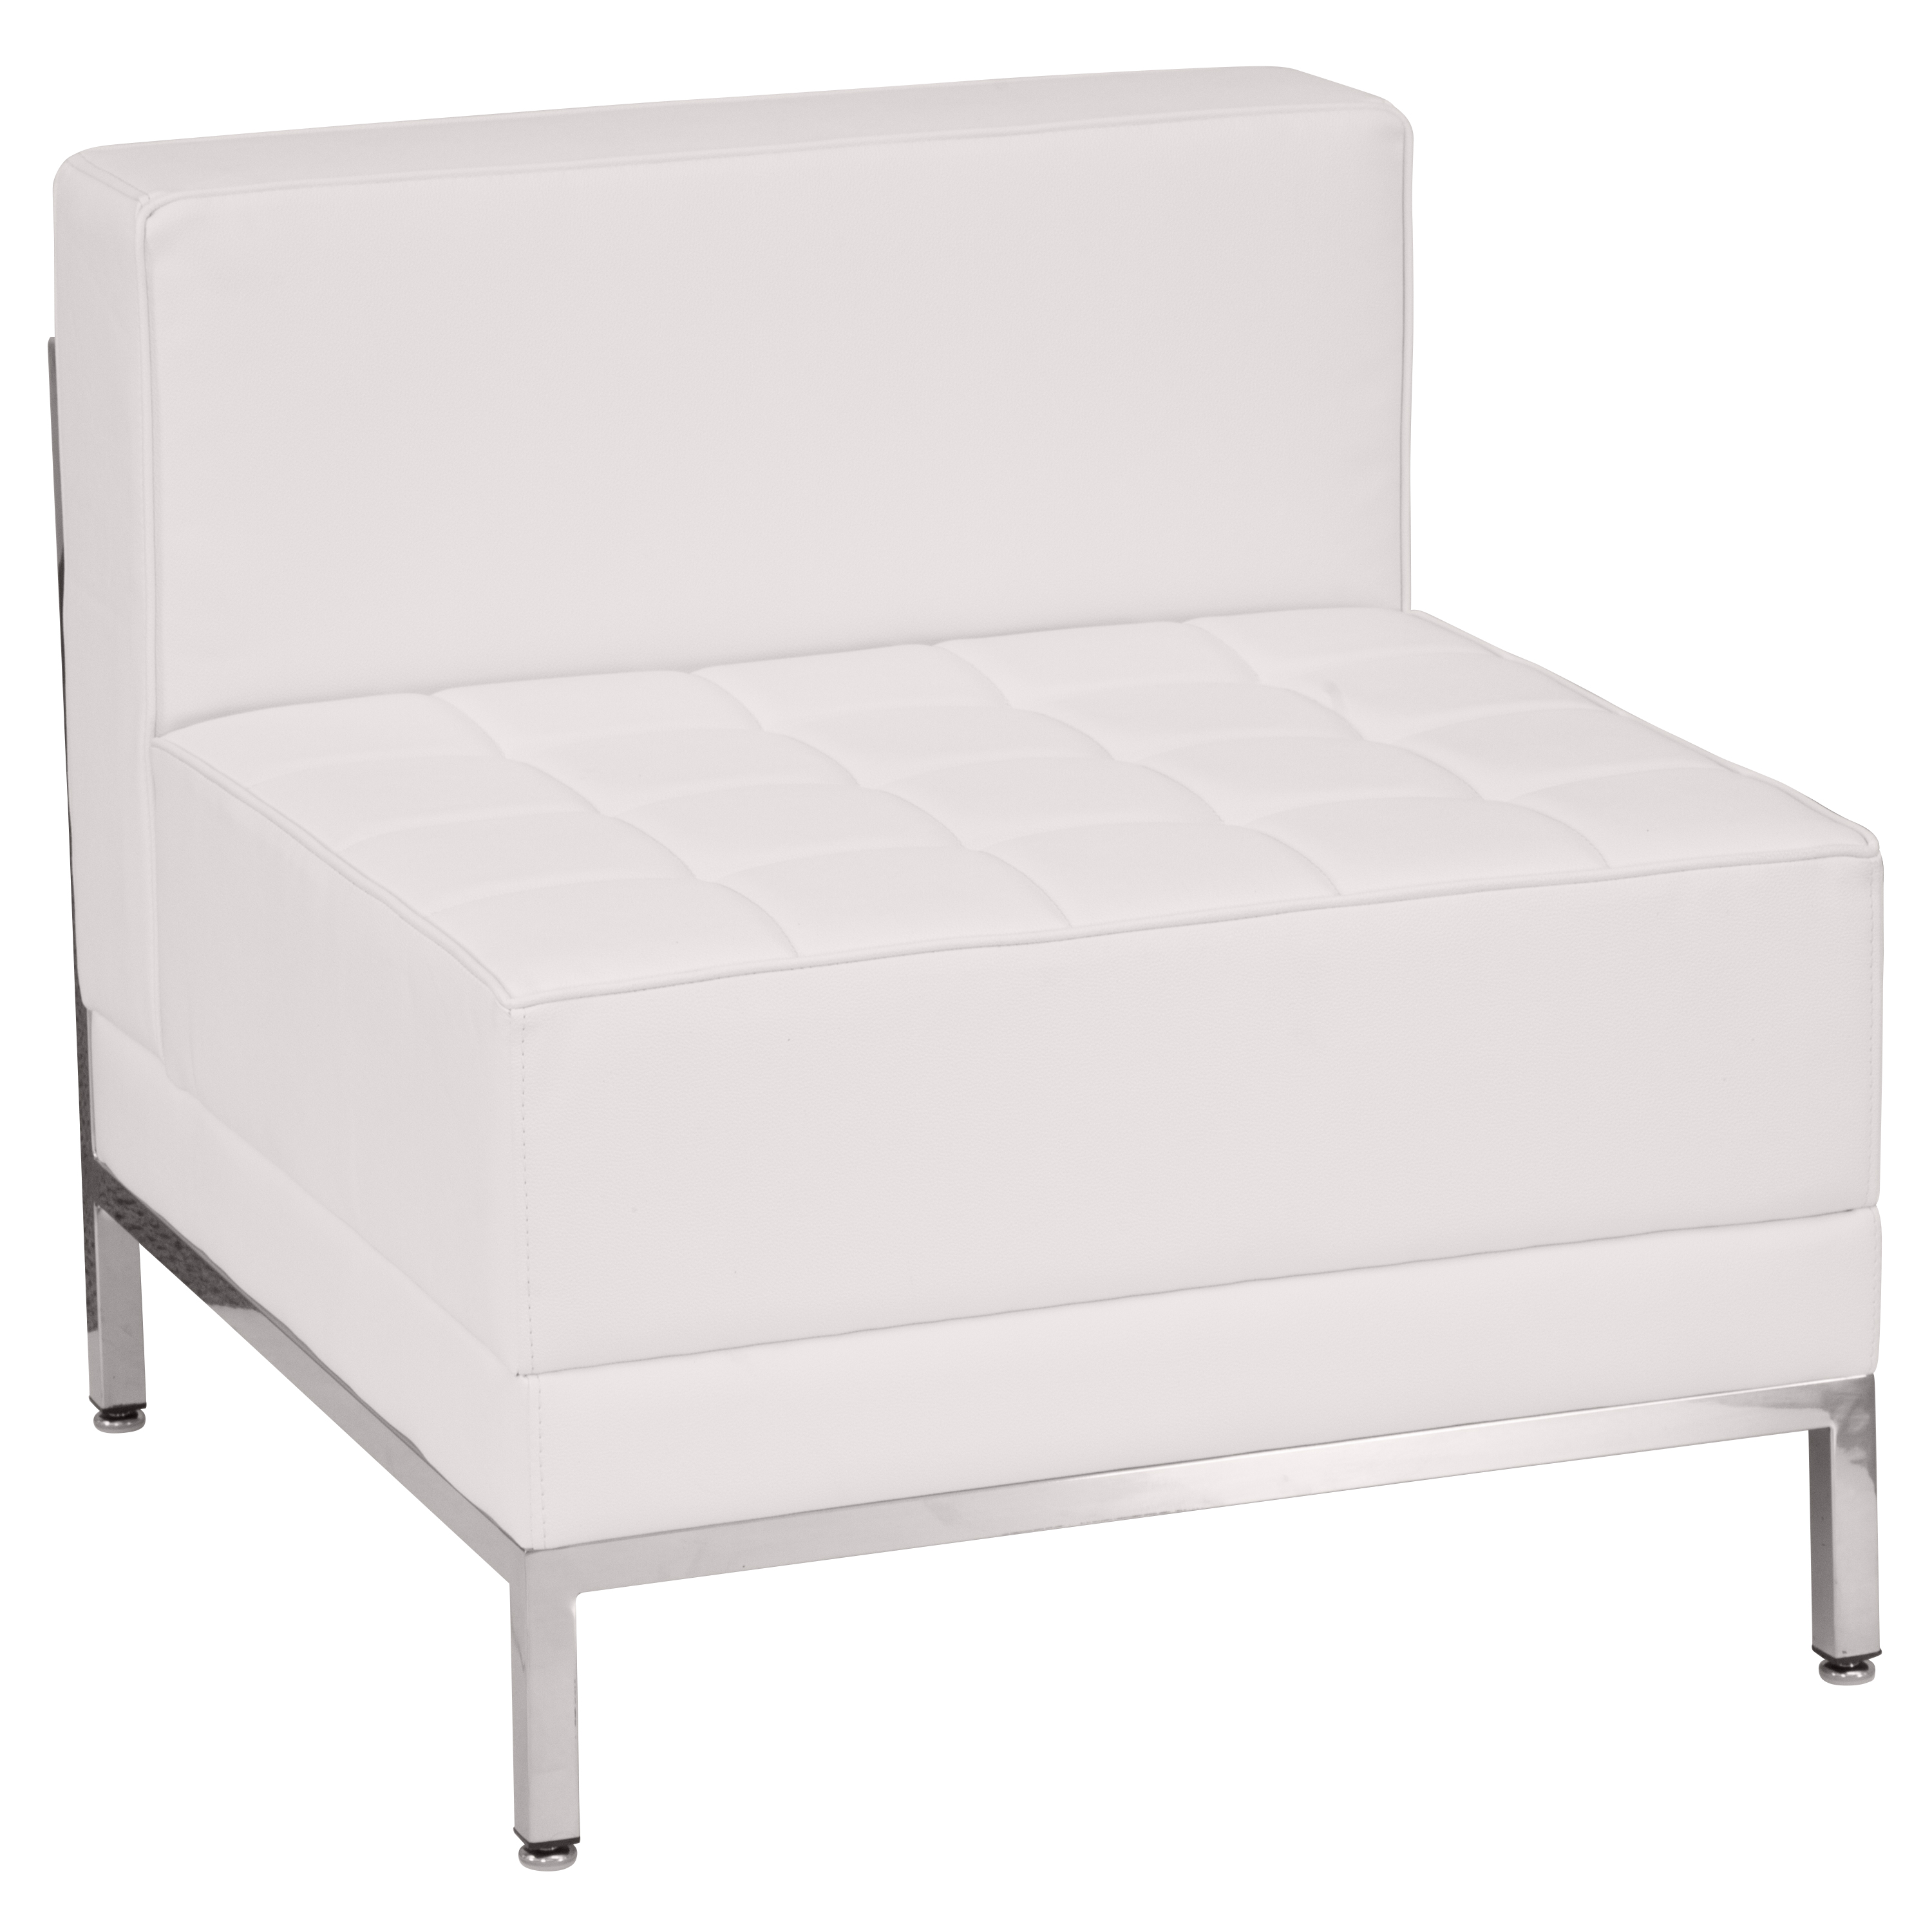 Flash Furniture ZB-IMAG-MIDDLE-WH-GG Hercules Imagination Series Contemporary White LeatherSoft Middle Chair